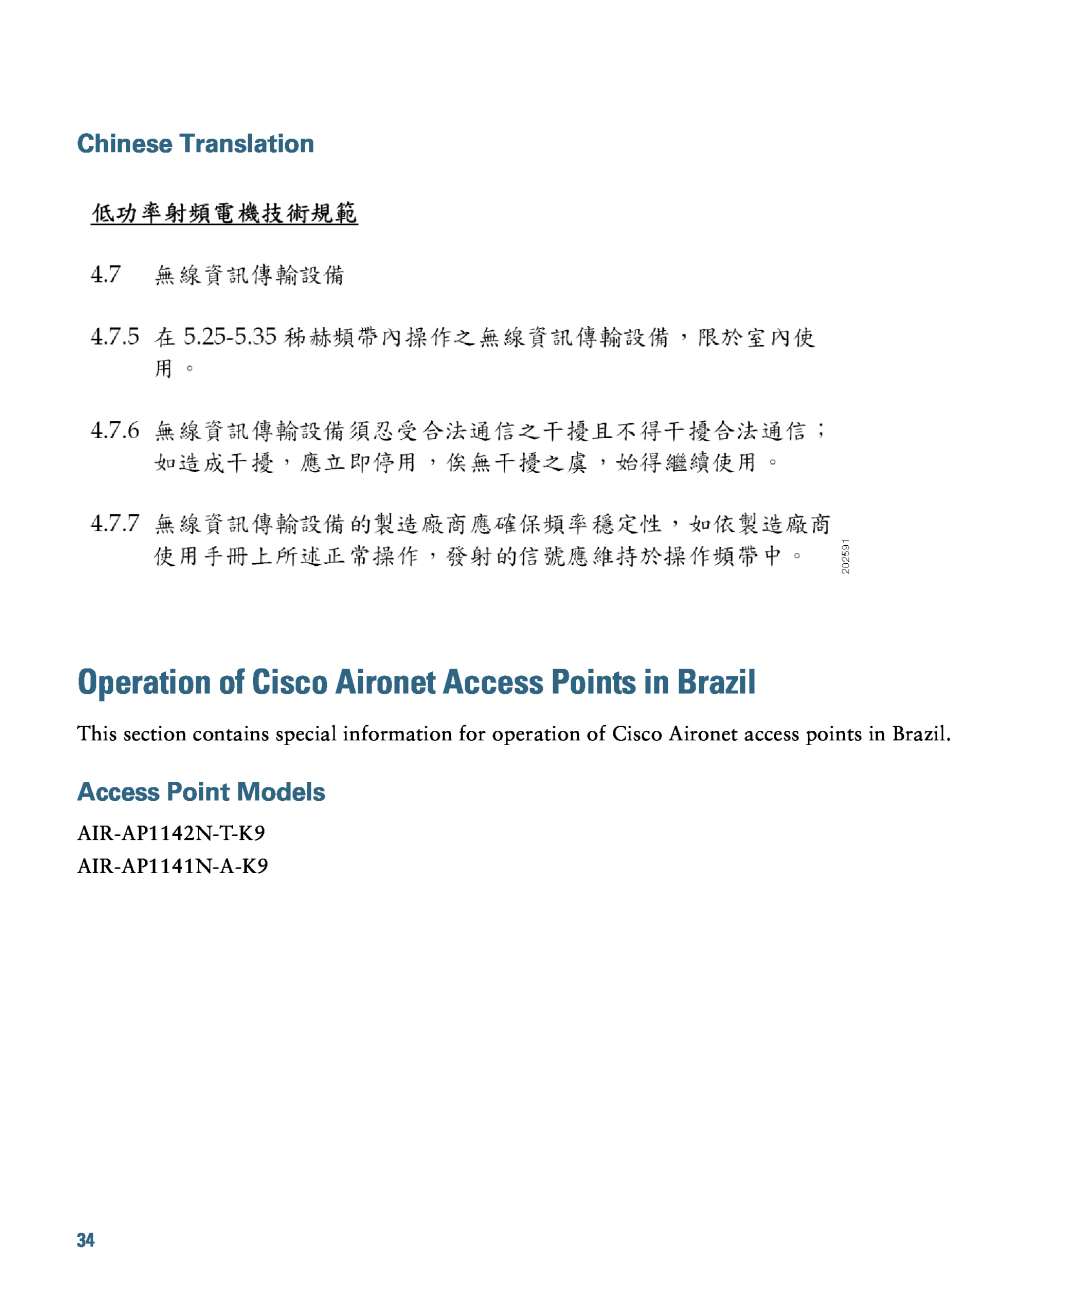 Cisco Systems 1140 Operation of Cisco Aironet Access Points in Brazil, Chinese Translation, Access Point Models 